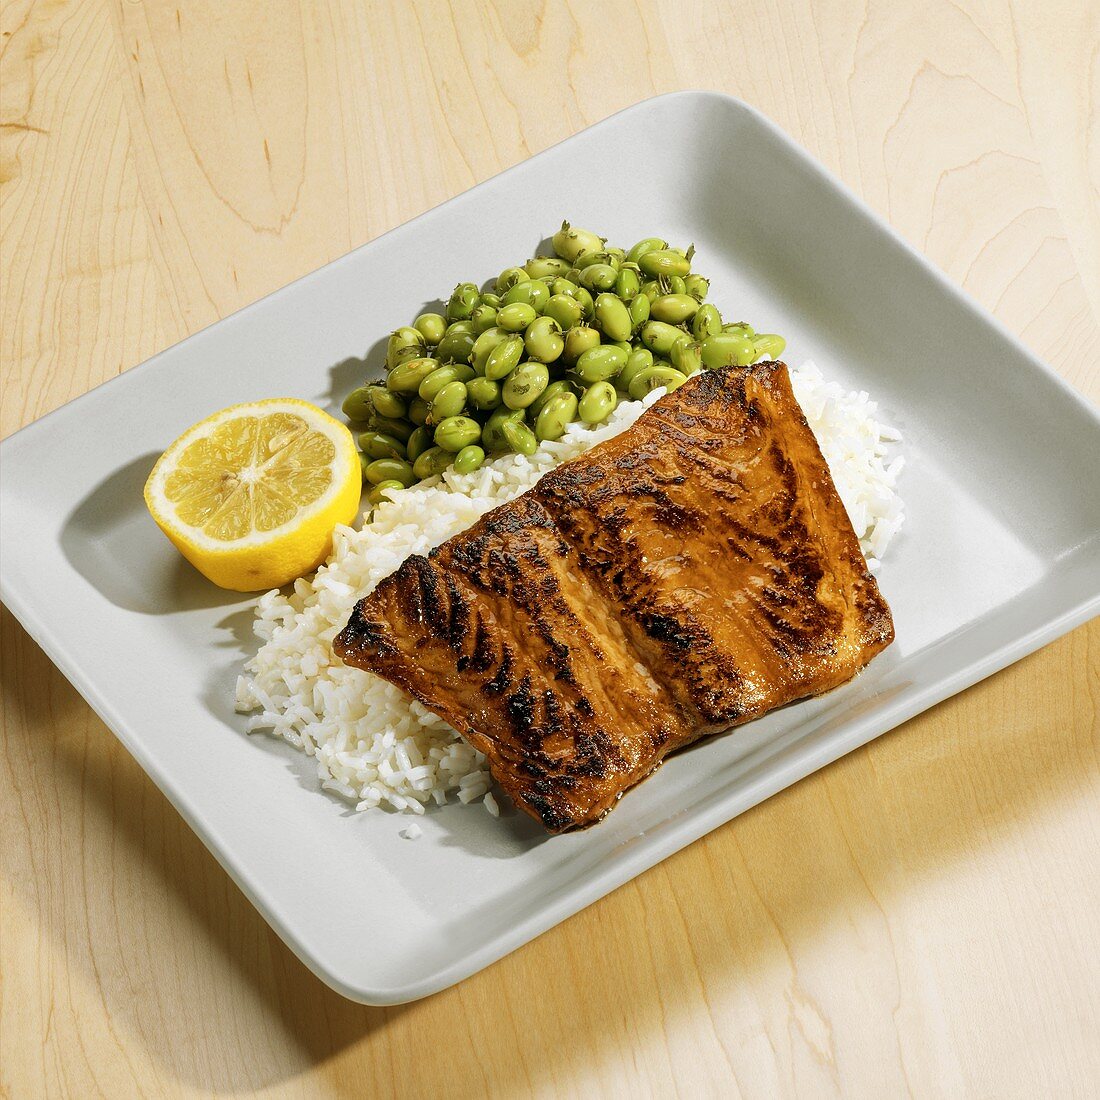 Salmon fillet with maple & soya glaze, rice and soya beans